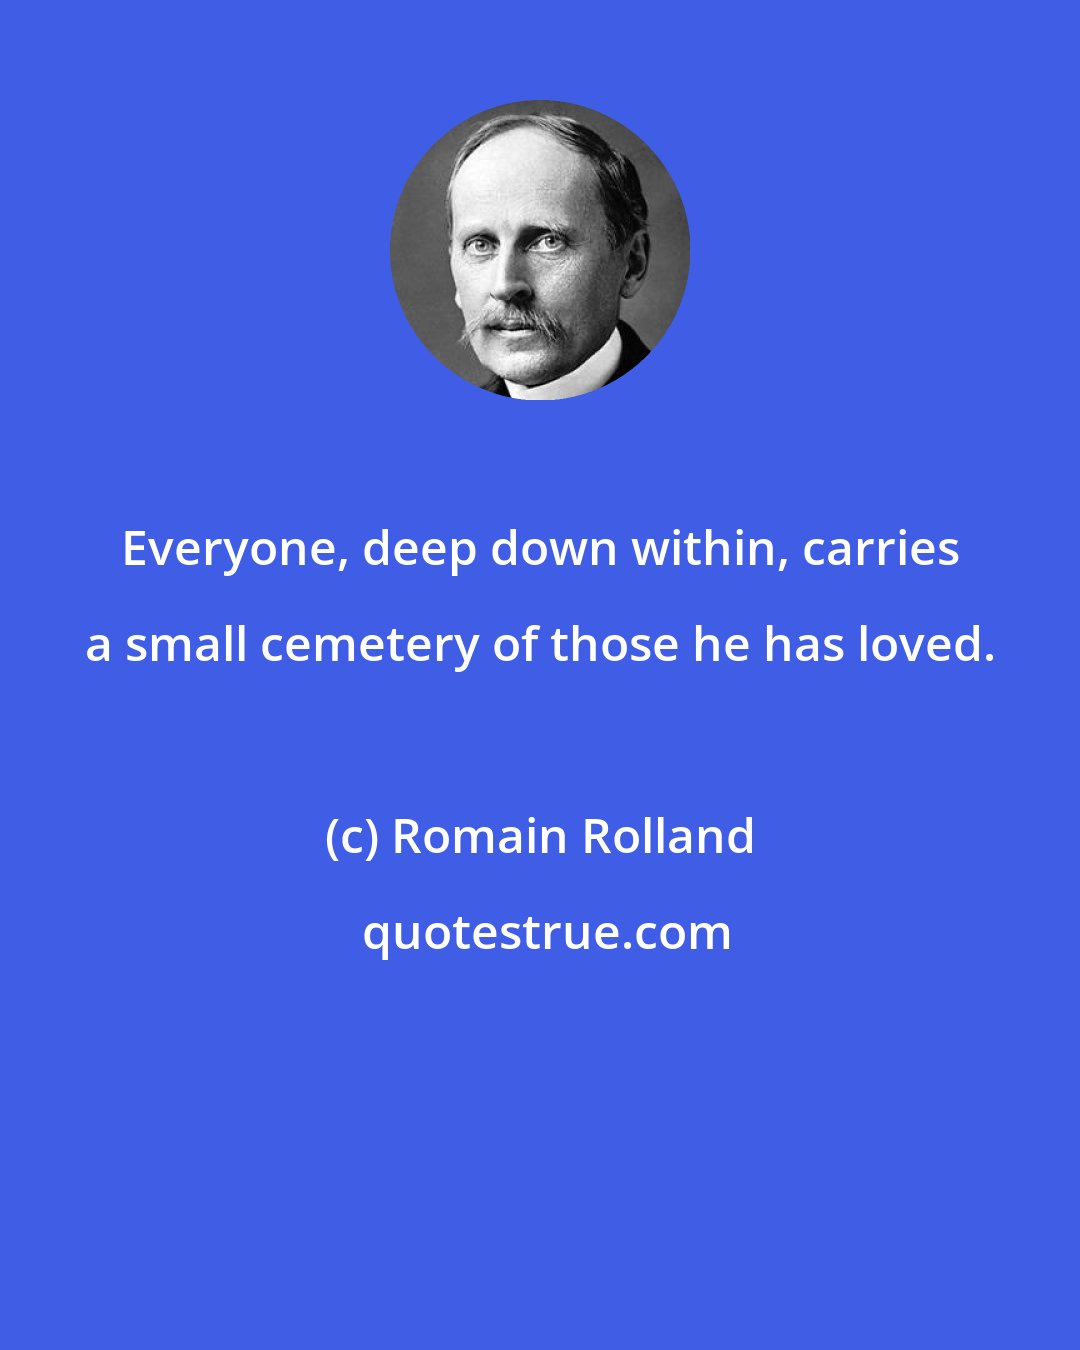 Romain Rolland: Everyone, deep down within, carries a small cemetery of those he has loved.